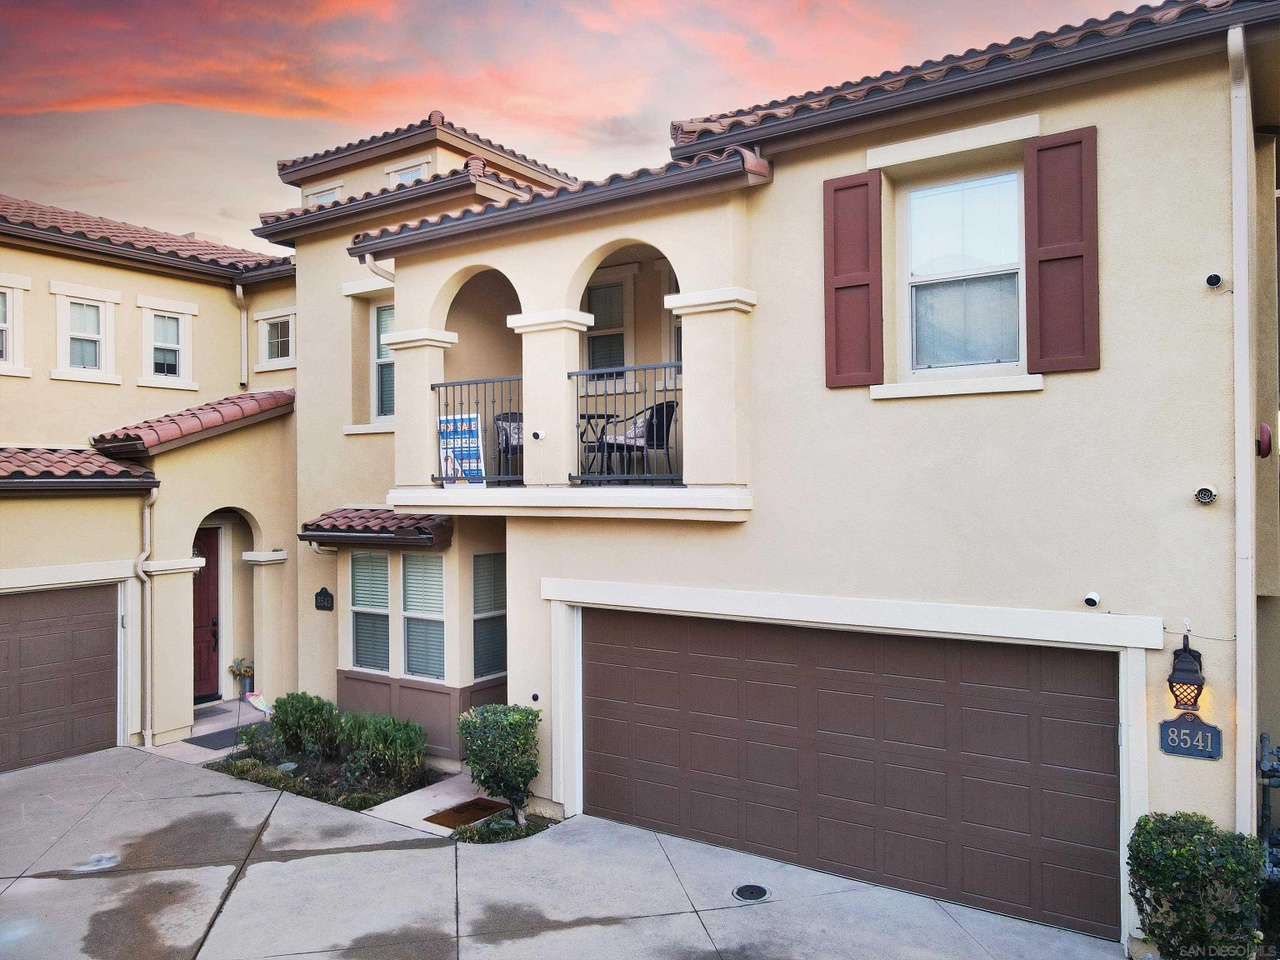 8541 Old Stonefield Chase, San Diego, CA 92127 | MLS# 230003326 | Redfin